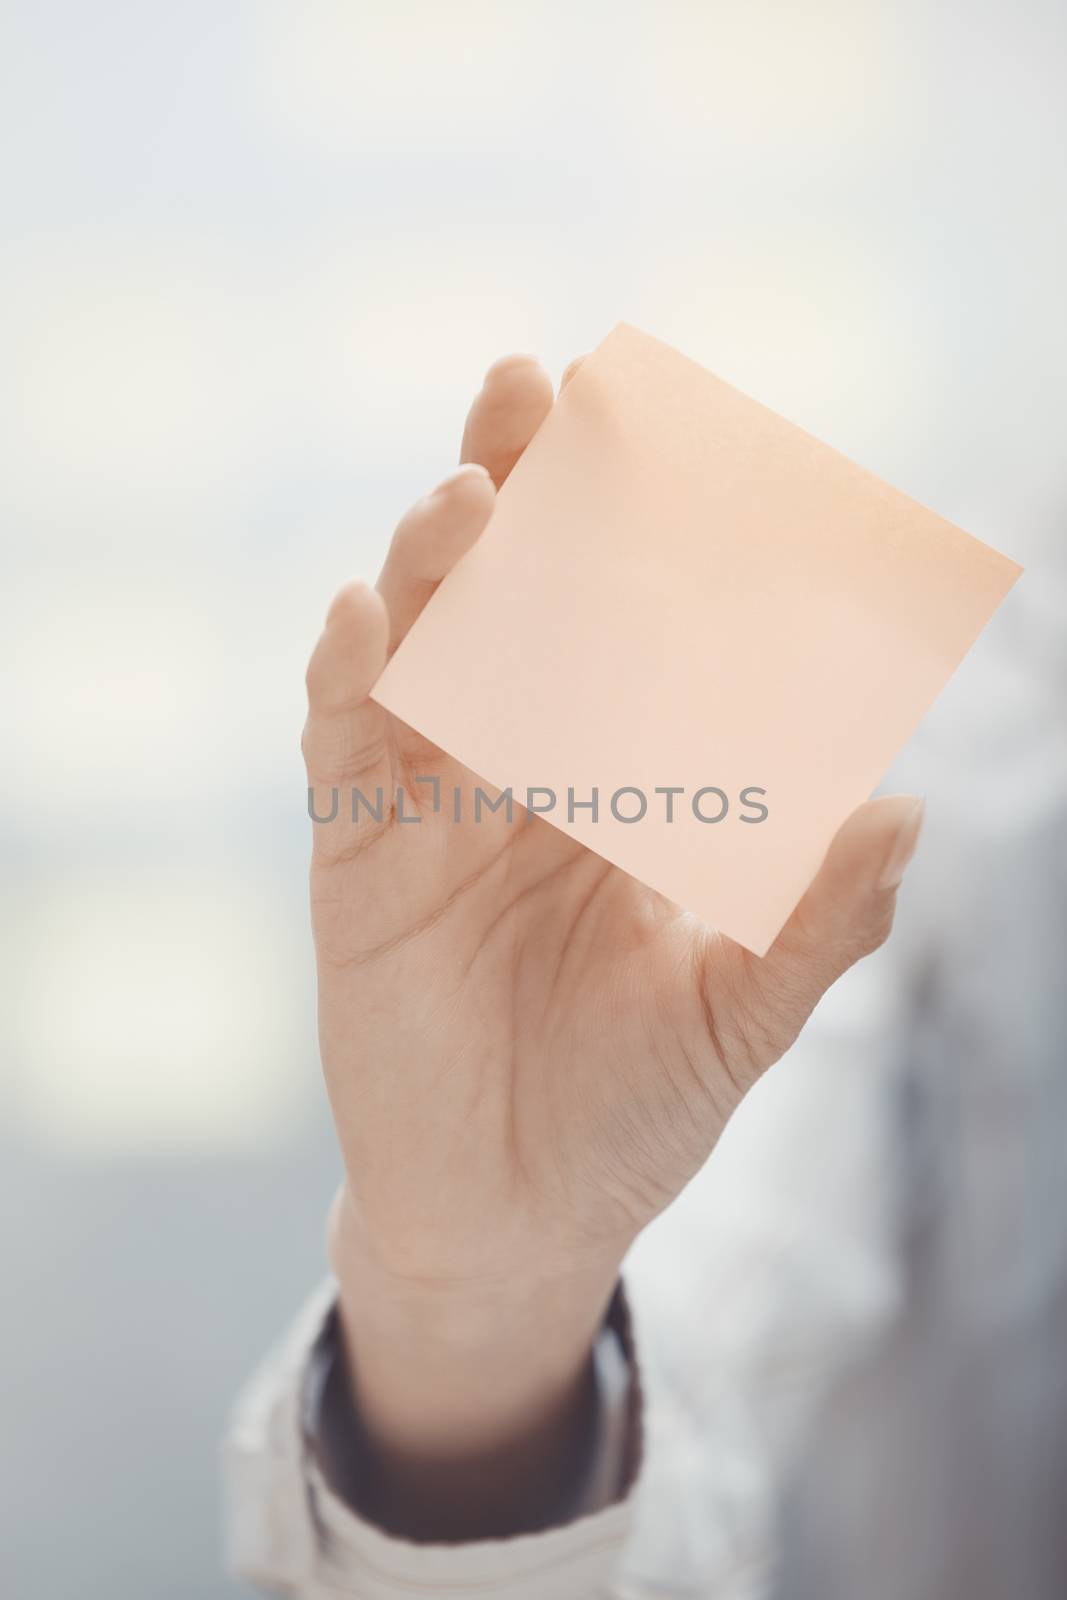 Woman holding sticky note with empty space